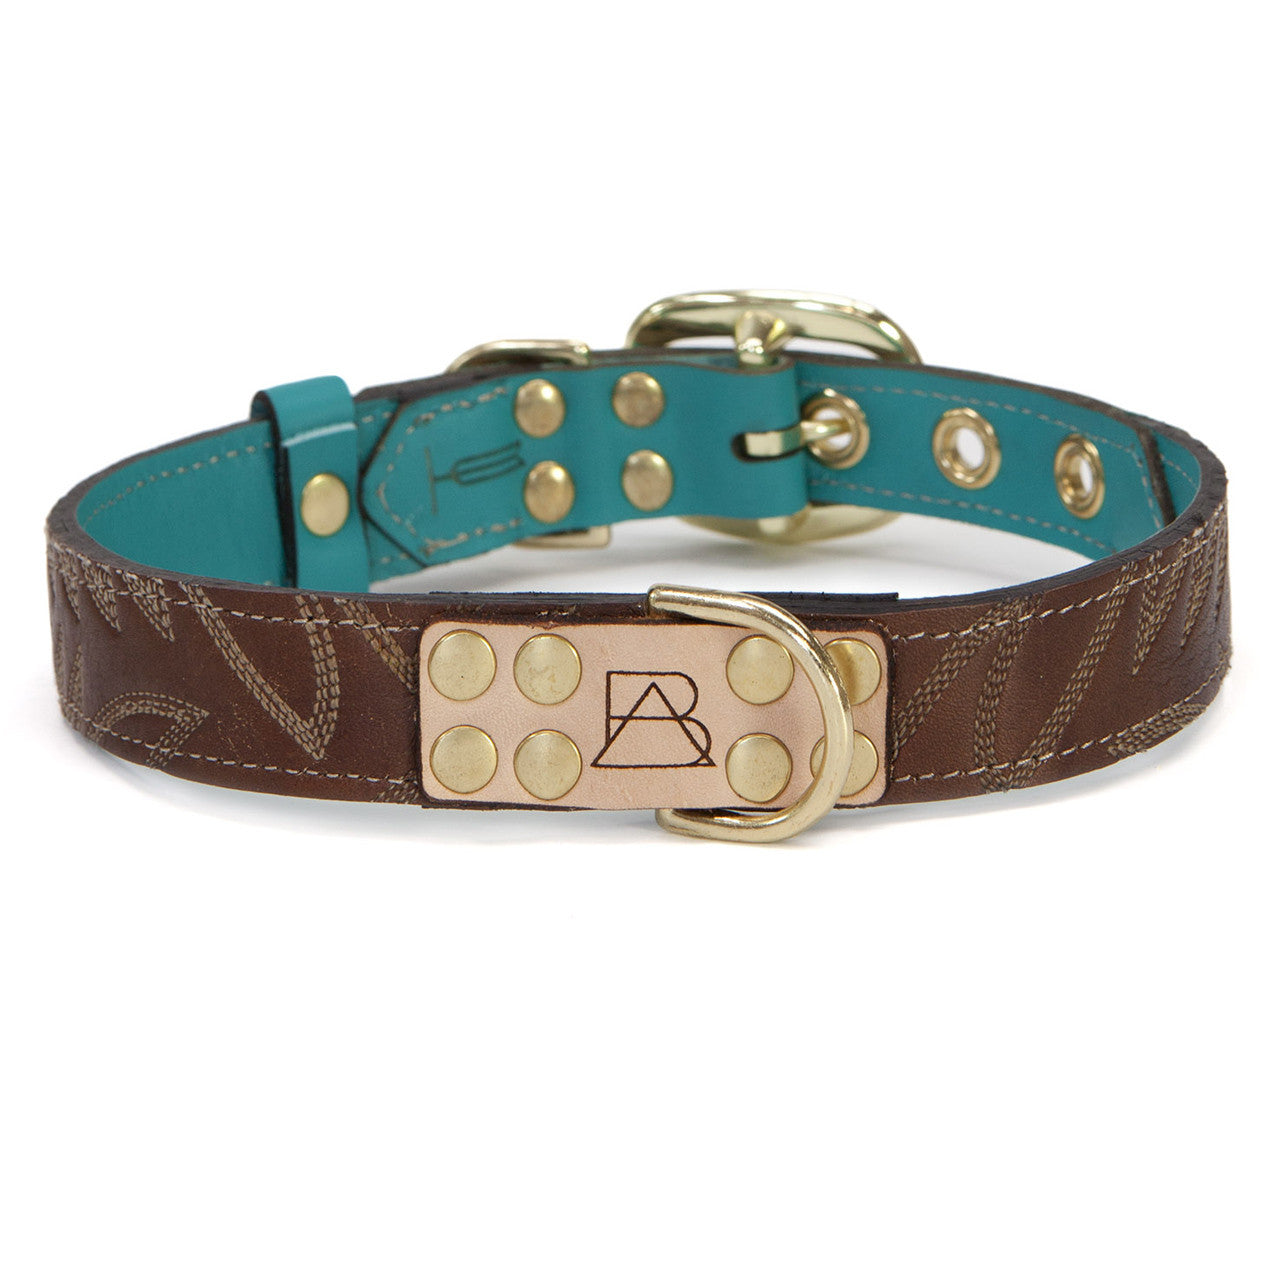 Turquoise Dog Collar with Dark Brown Leather + White Stitching (front view)